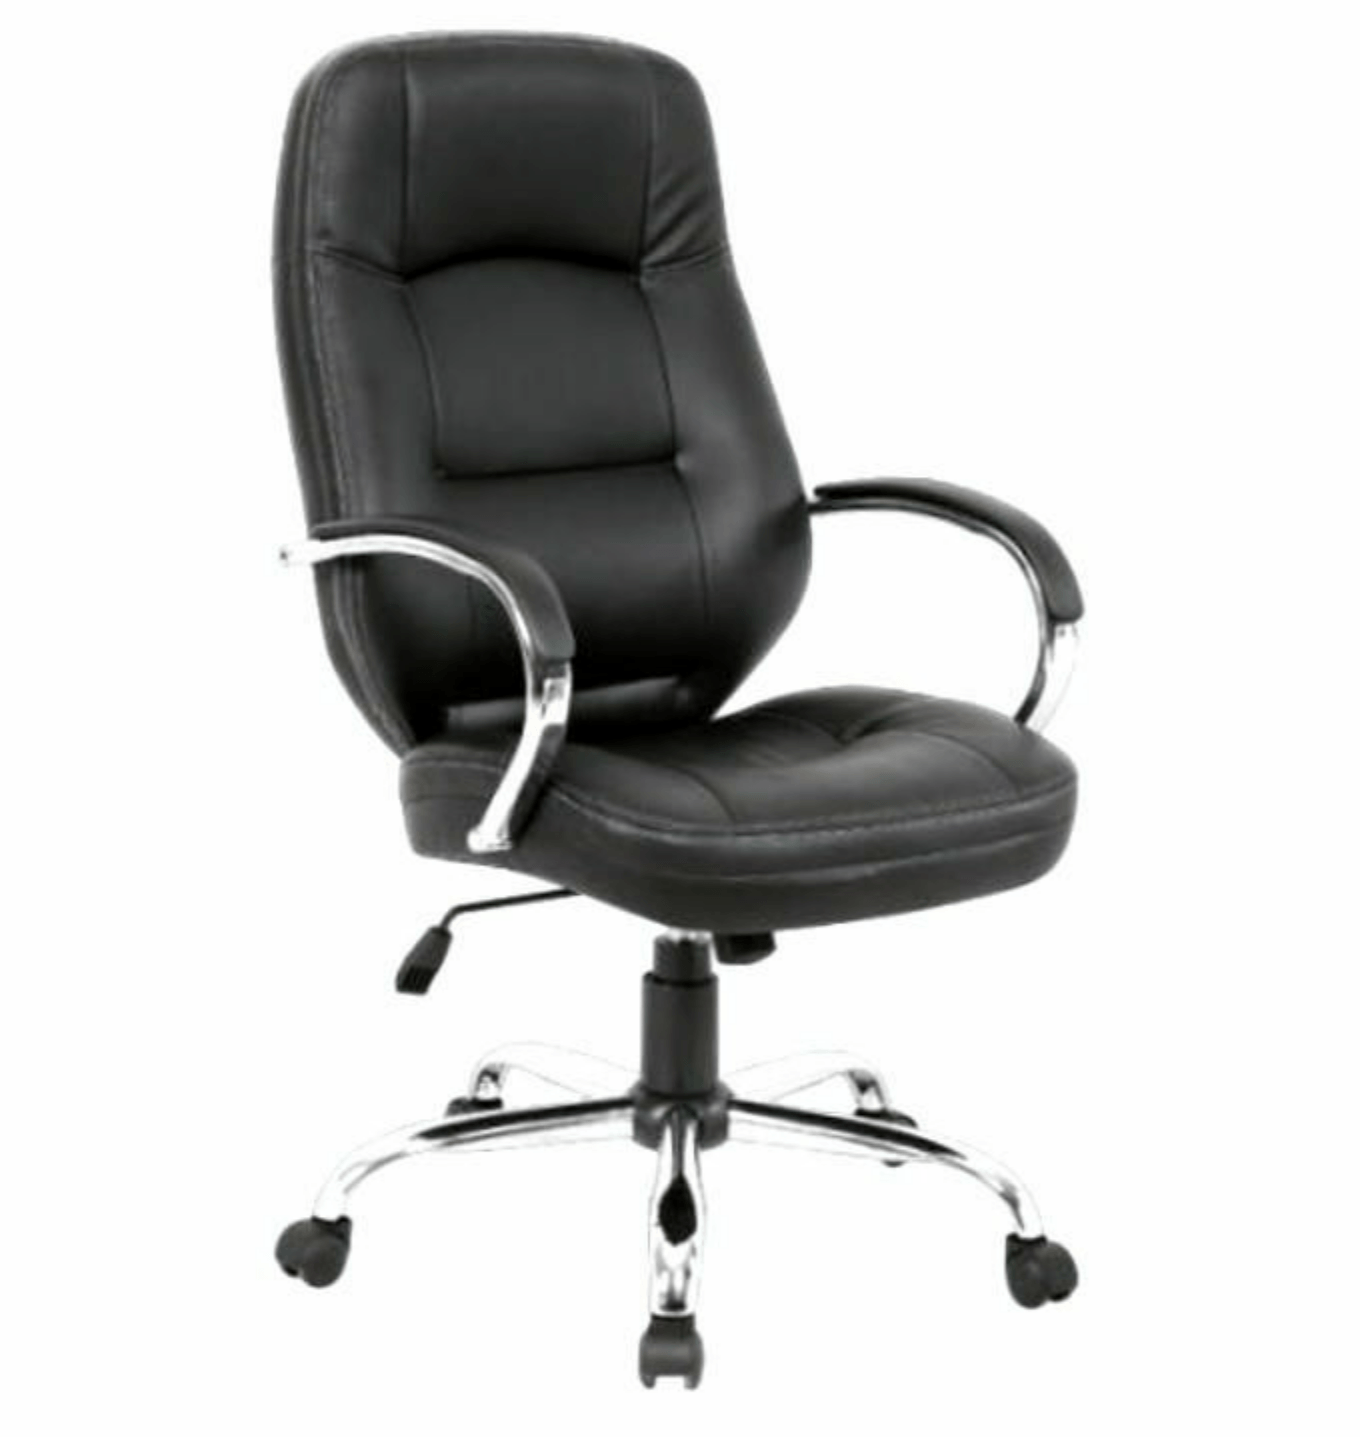 Executive Swivel Office Chair - High Back Lumber Support | Quality Leather | Nigeria